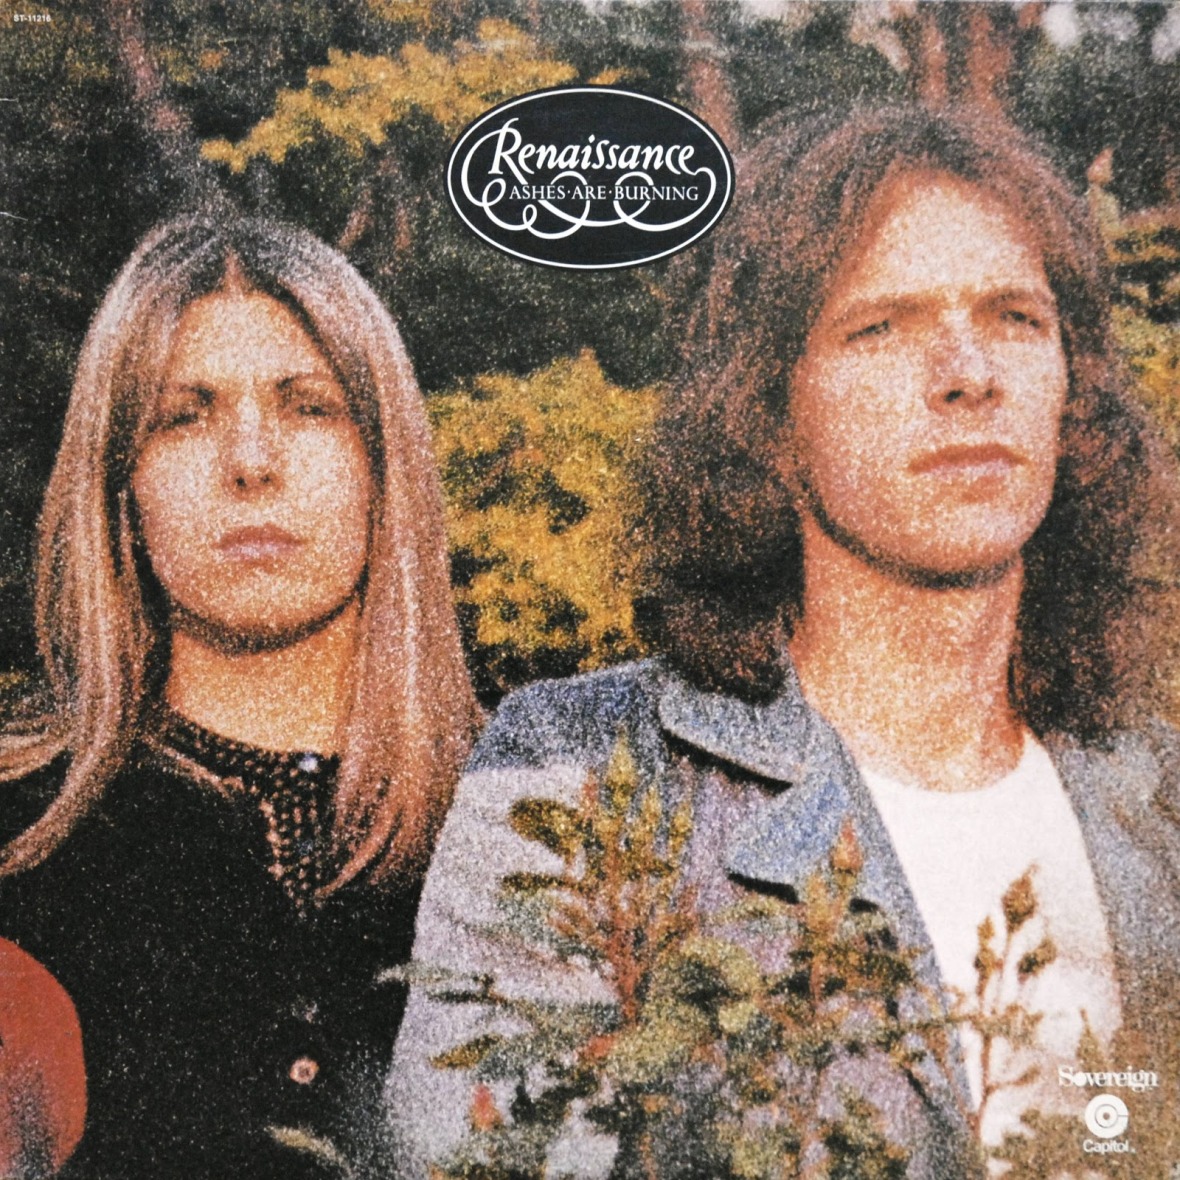 1973 Ashes Are Burning - Renaissance (L.P U.S.A Capitol Records ST-11216) (1).JPG